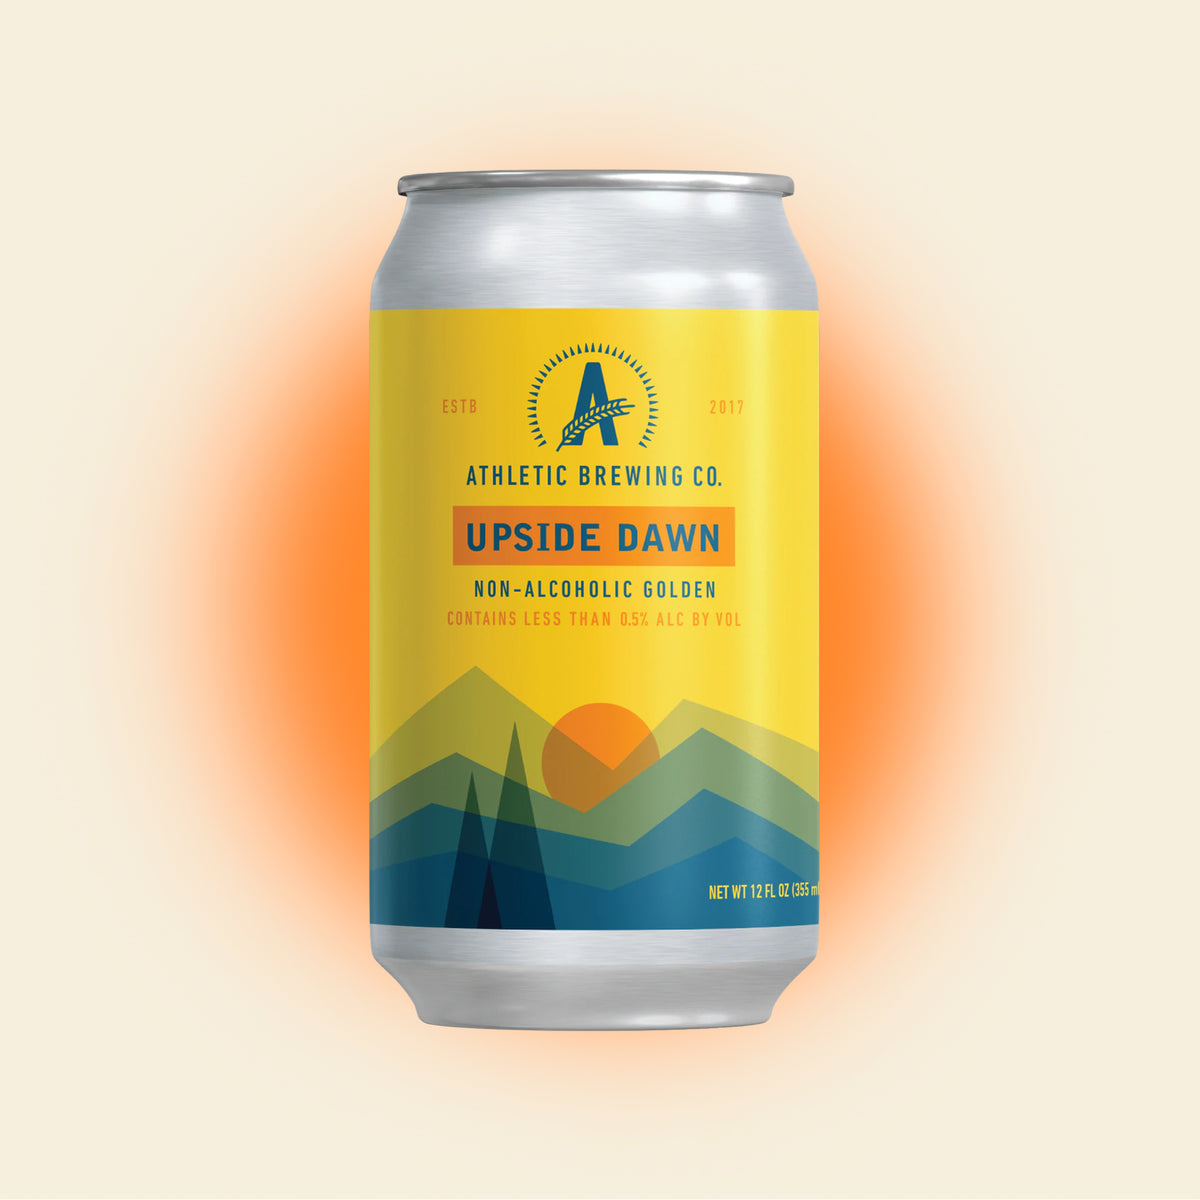 Athletic Brewing Upside Dawn Golden Ale Nonalcoholic Beer